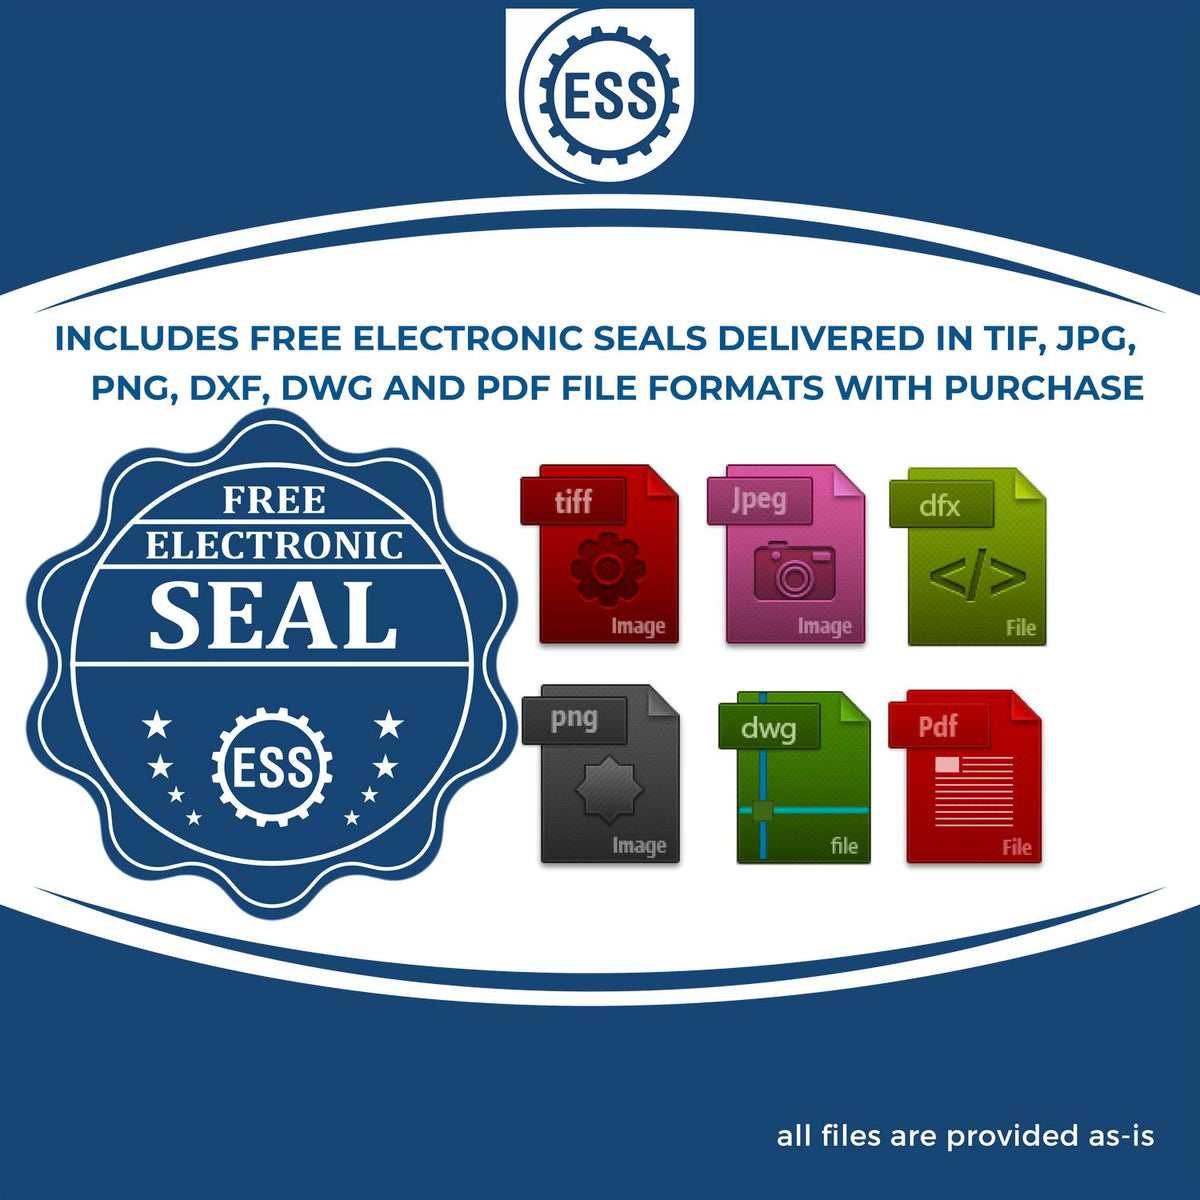 An infographic for the free electronic seal for the Long Reach Michigan Geology Seal illustrating the different file type icons such as DXF, DWG, TIF, JPG and PNG.